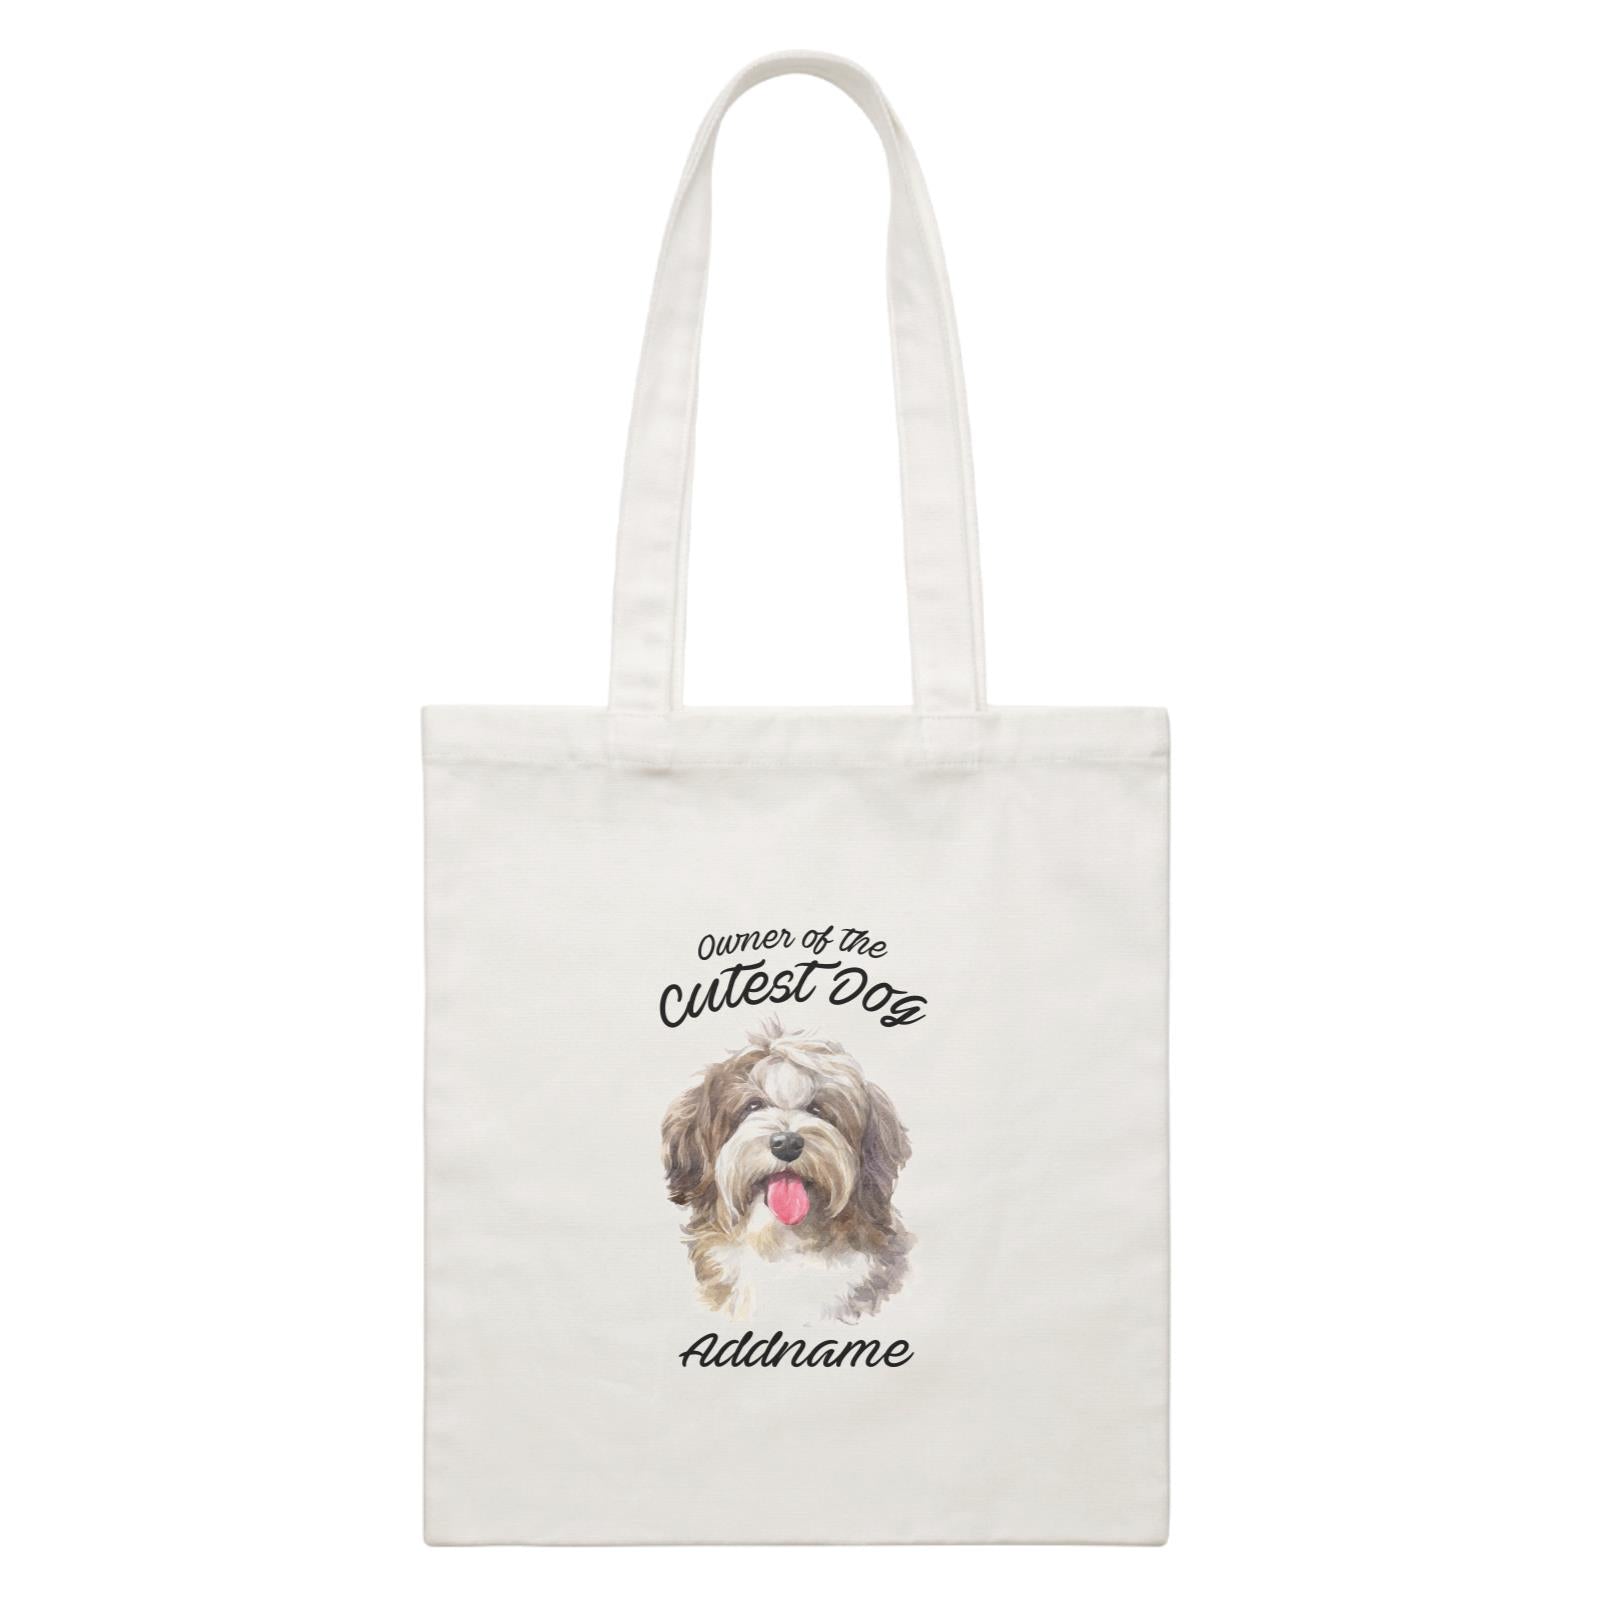 Watercolor Dog Owner Of The Cutest Dog Shaggy Havanese Addname White Canvas Bag